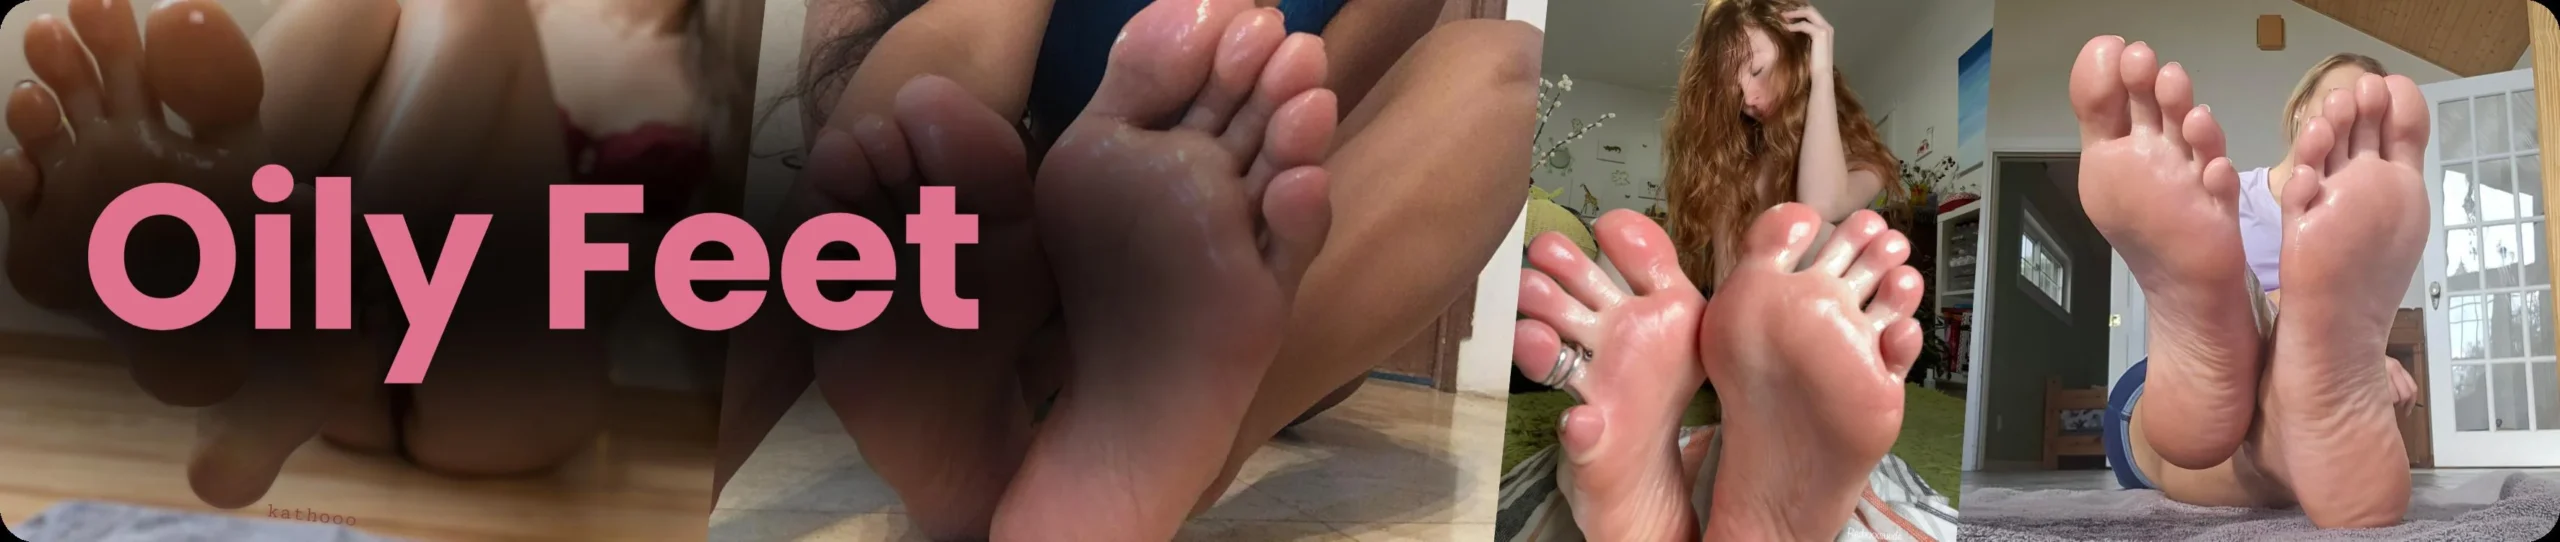 Oily Feet Category Banner